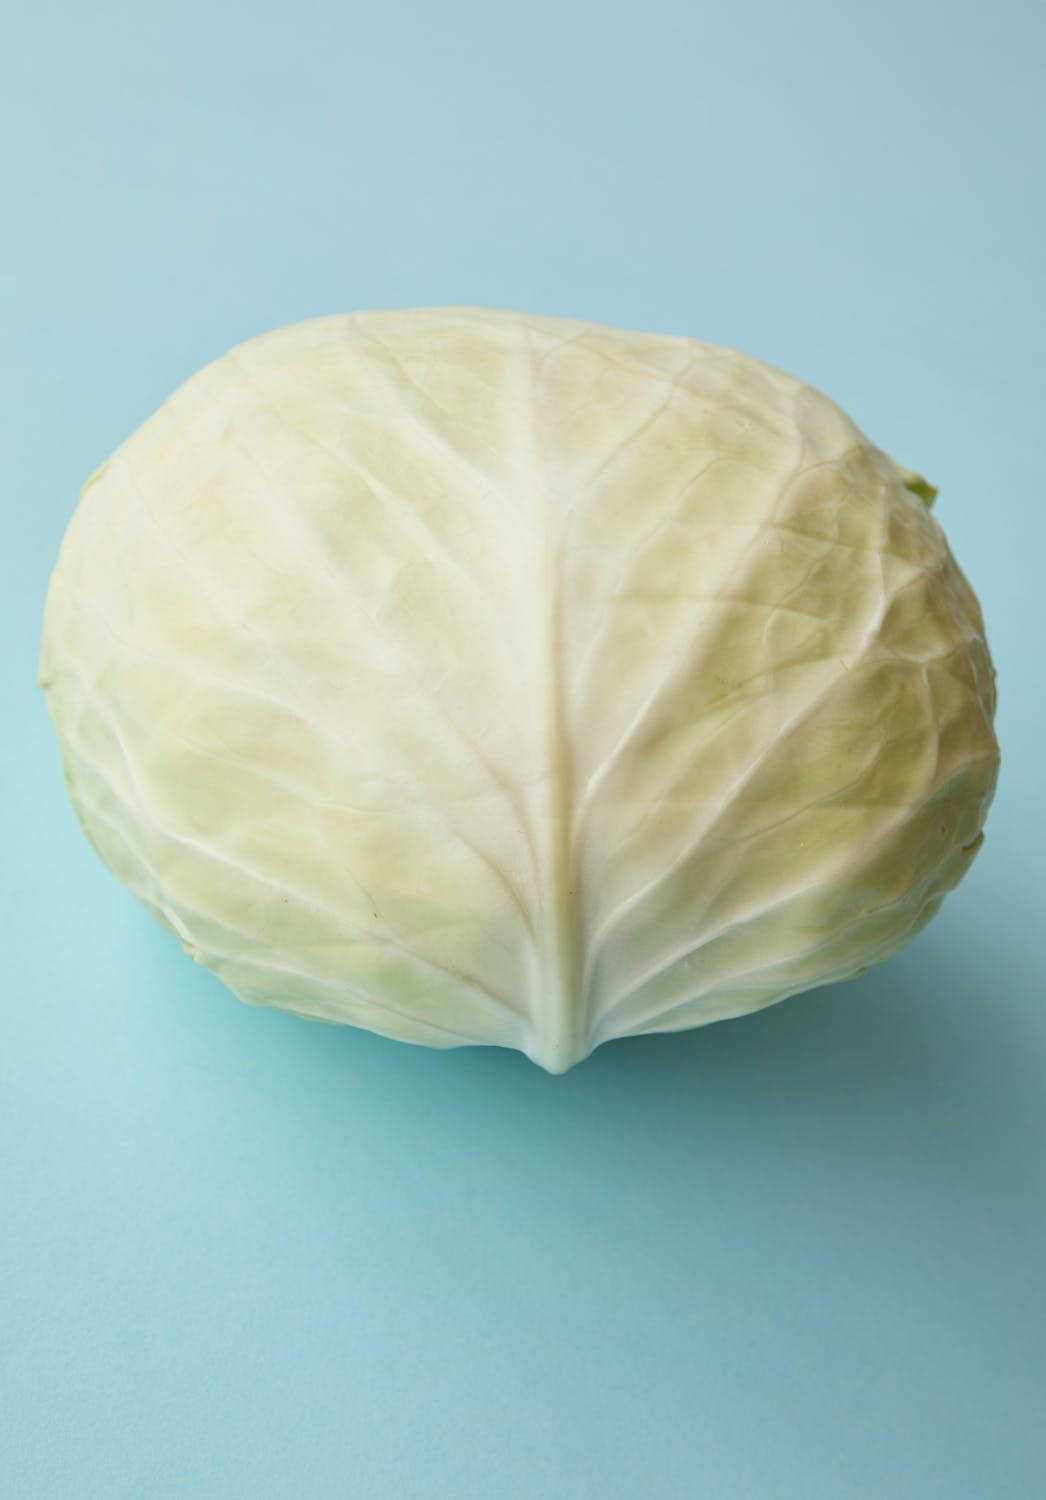 Whole Cabbage Wallpaper